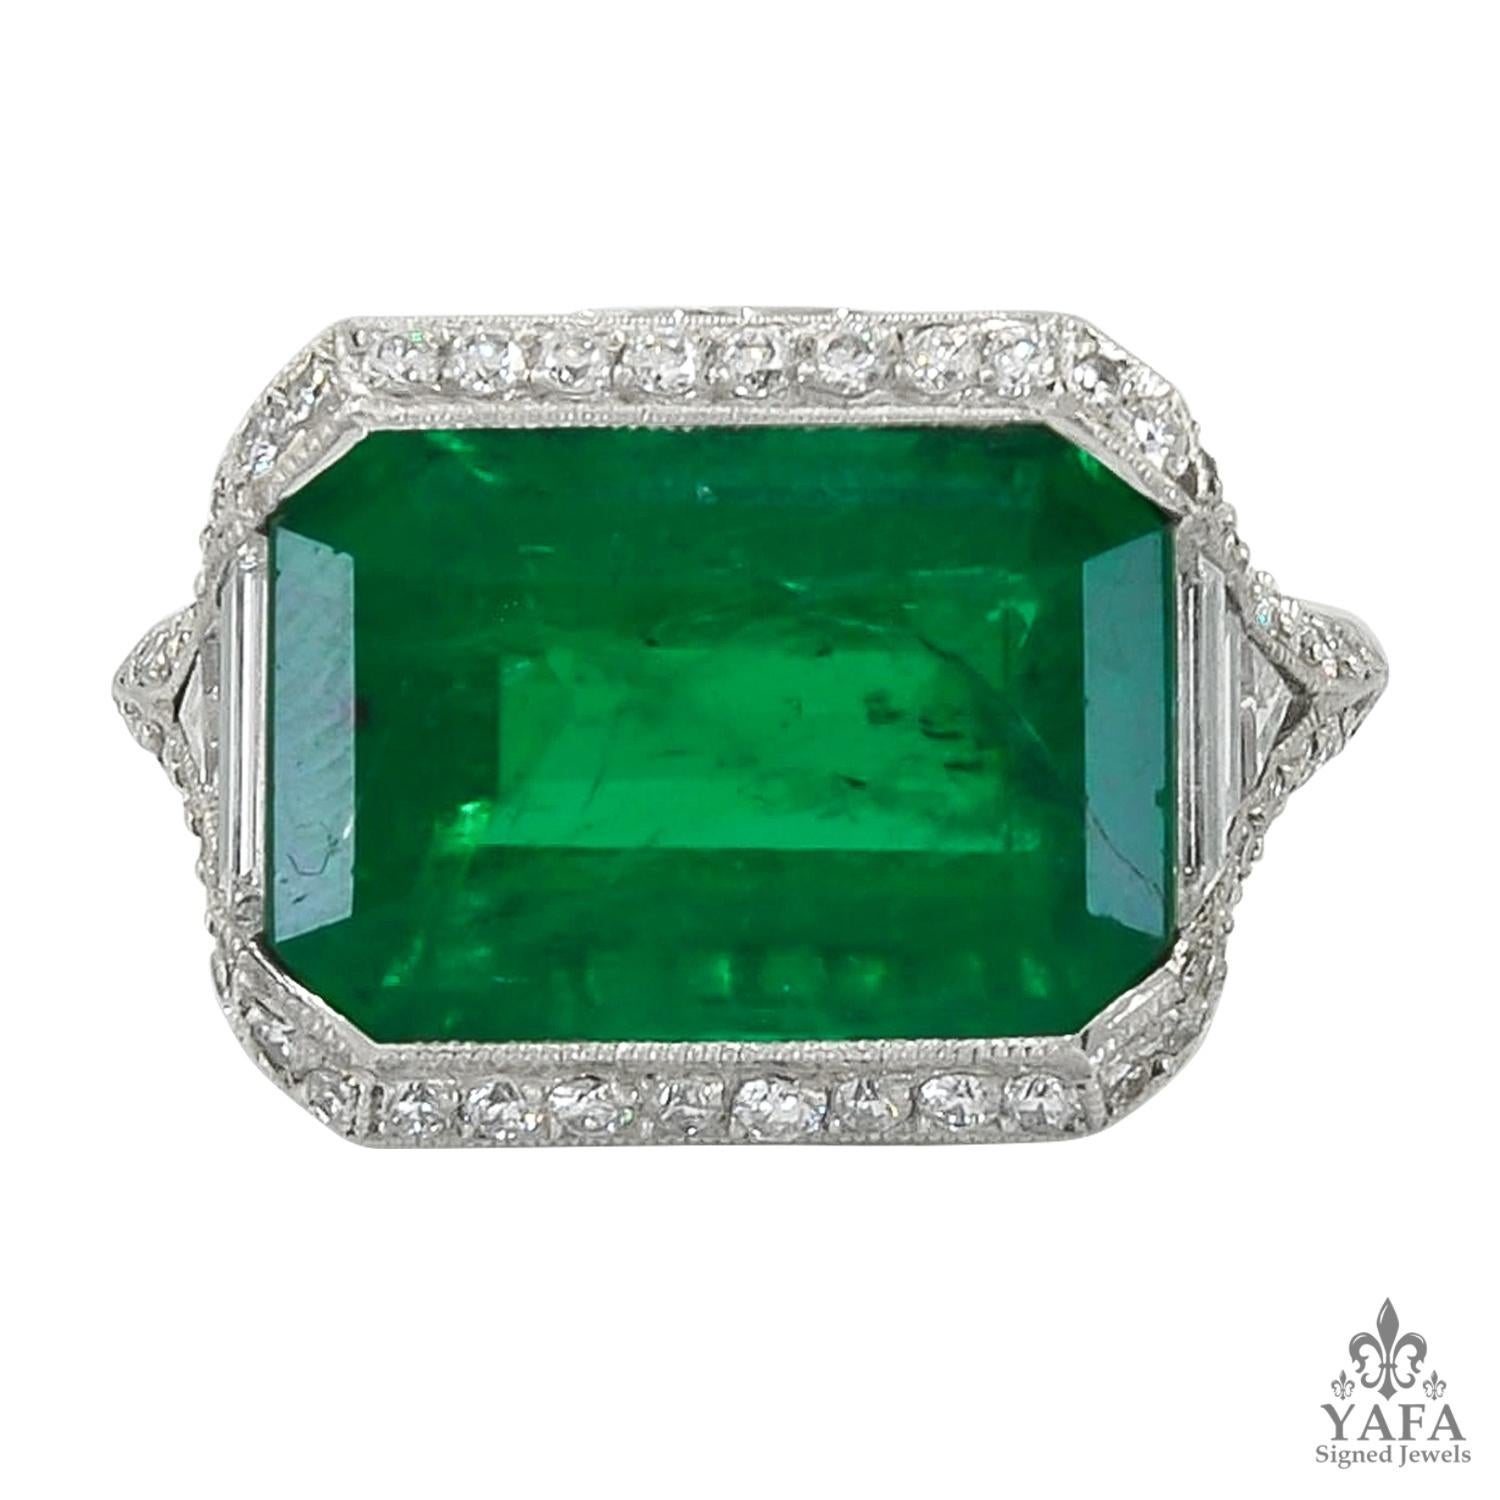 A long step-cut emerald set in the east-west direction, with a diamond pavé demi-halo. The ring's side details feature embedded white round diamonds, along with a bridge of tiny calibré-cut emeralds set in arc form.
Emerald weight approx. 9.68